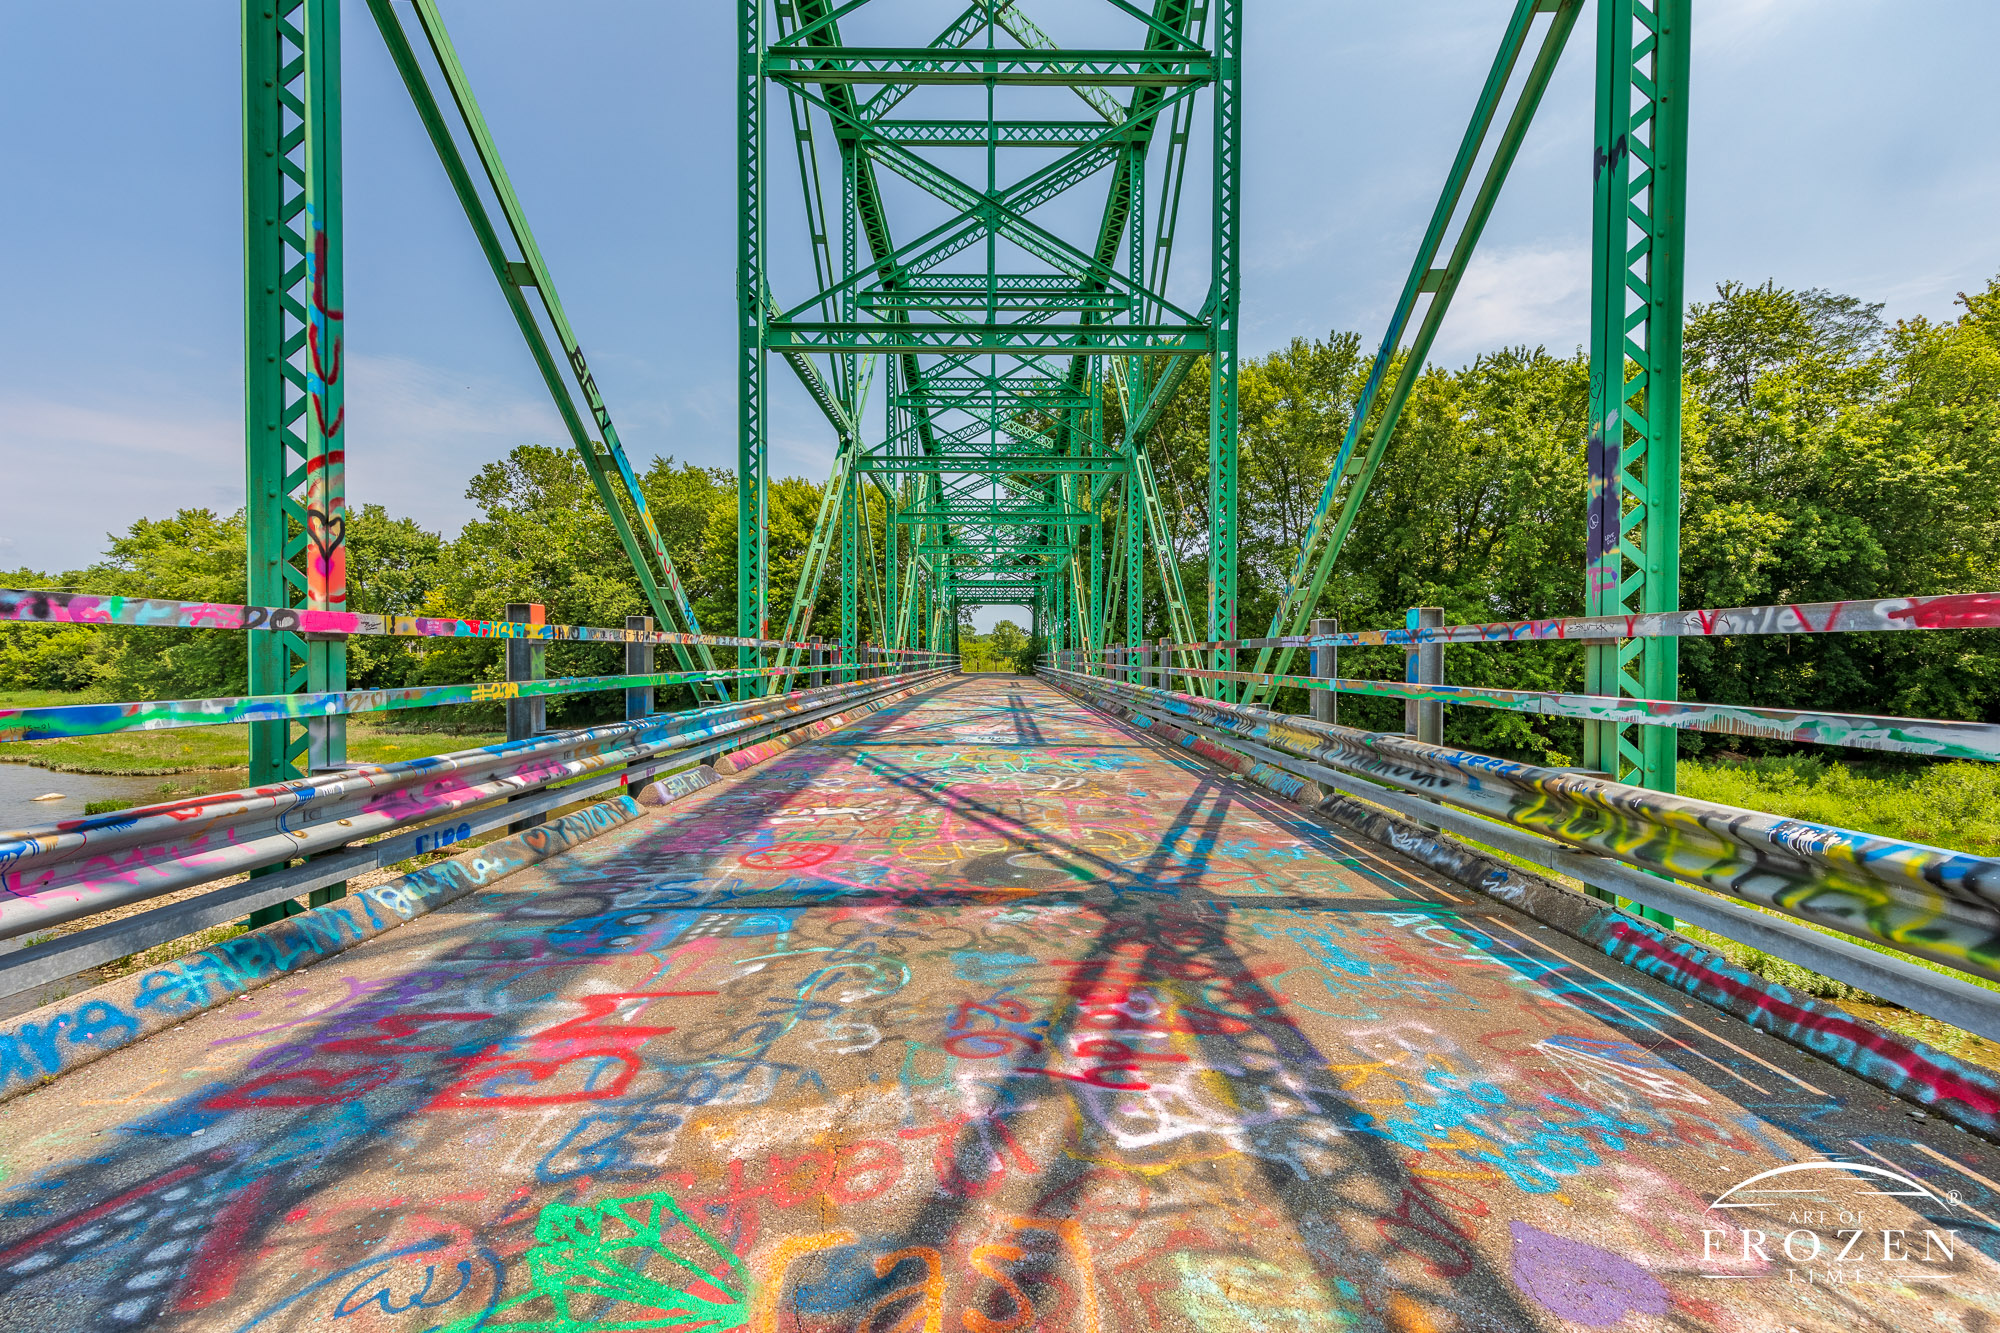 An abandoned Steel-truss bridge that now serves as a place for positive graffiti